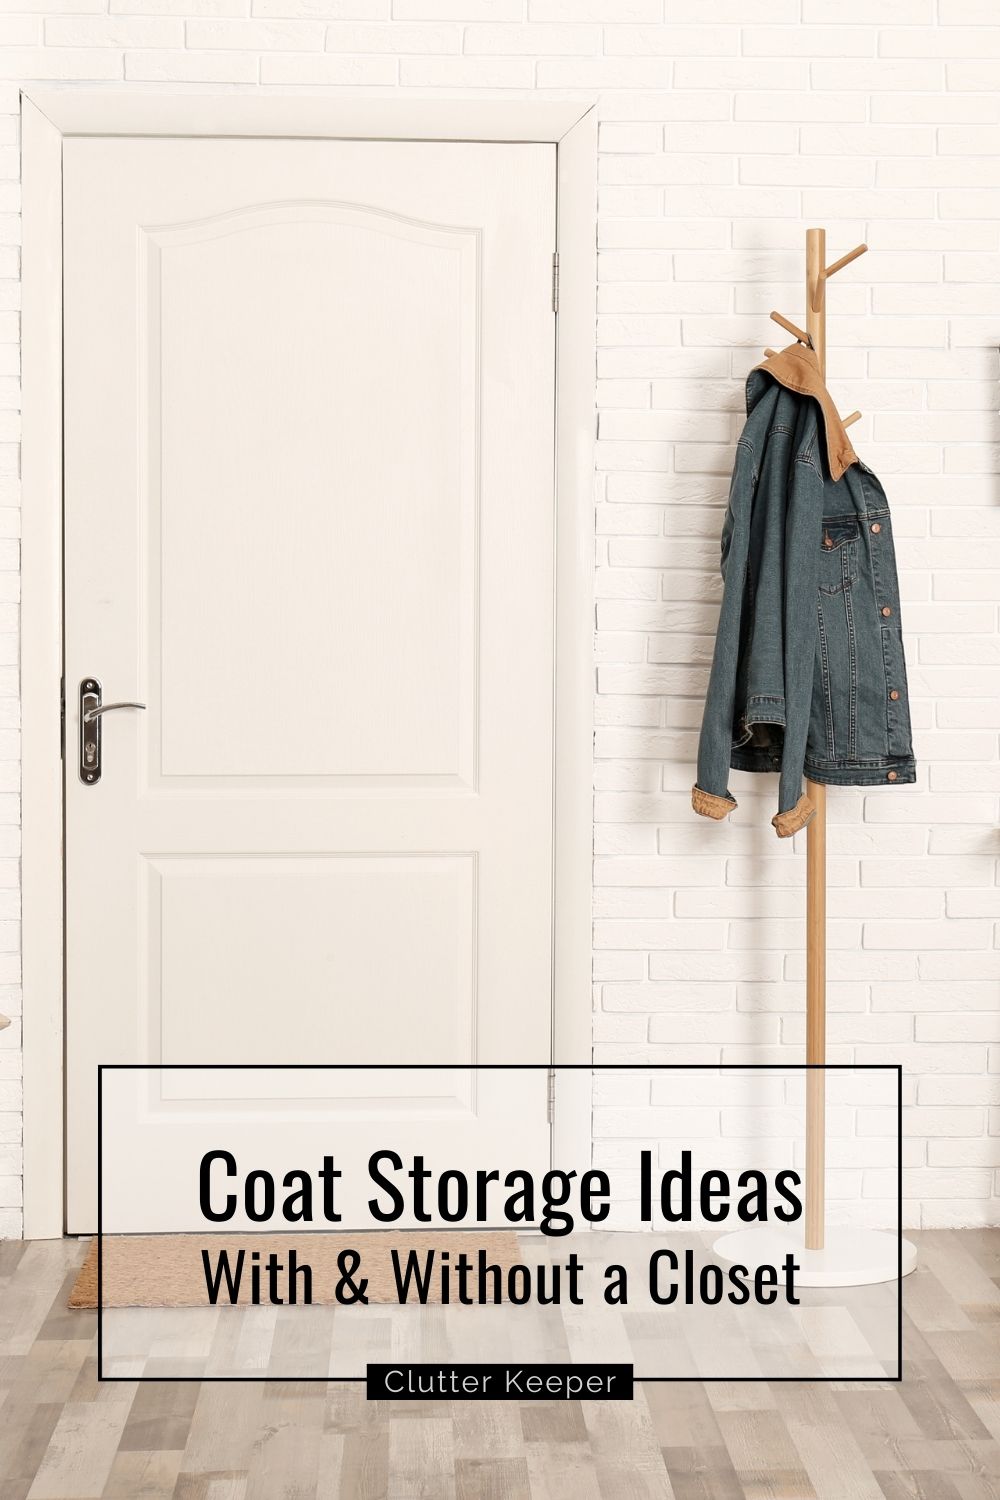 Coat storage ideas with and without a closet.